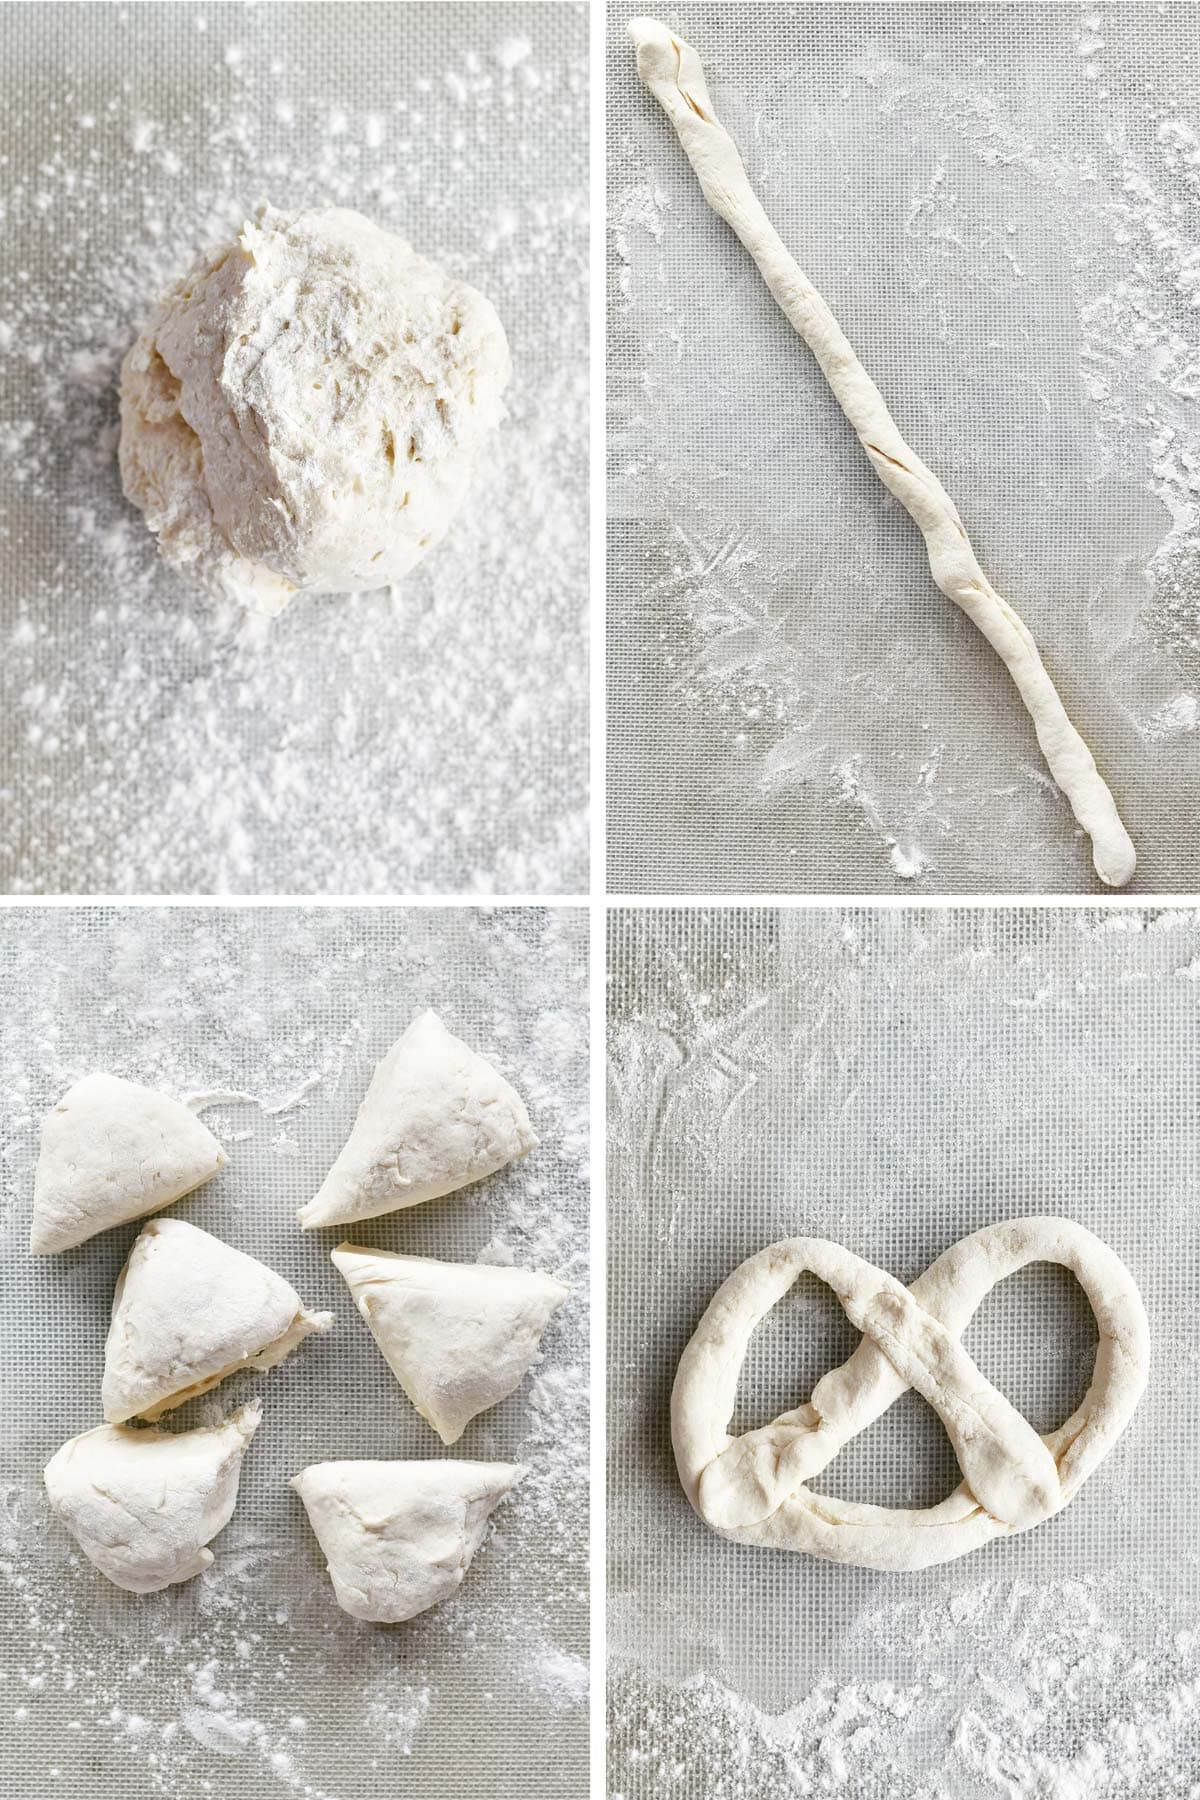 Steps to forming two ingredient dough soft pretzels.